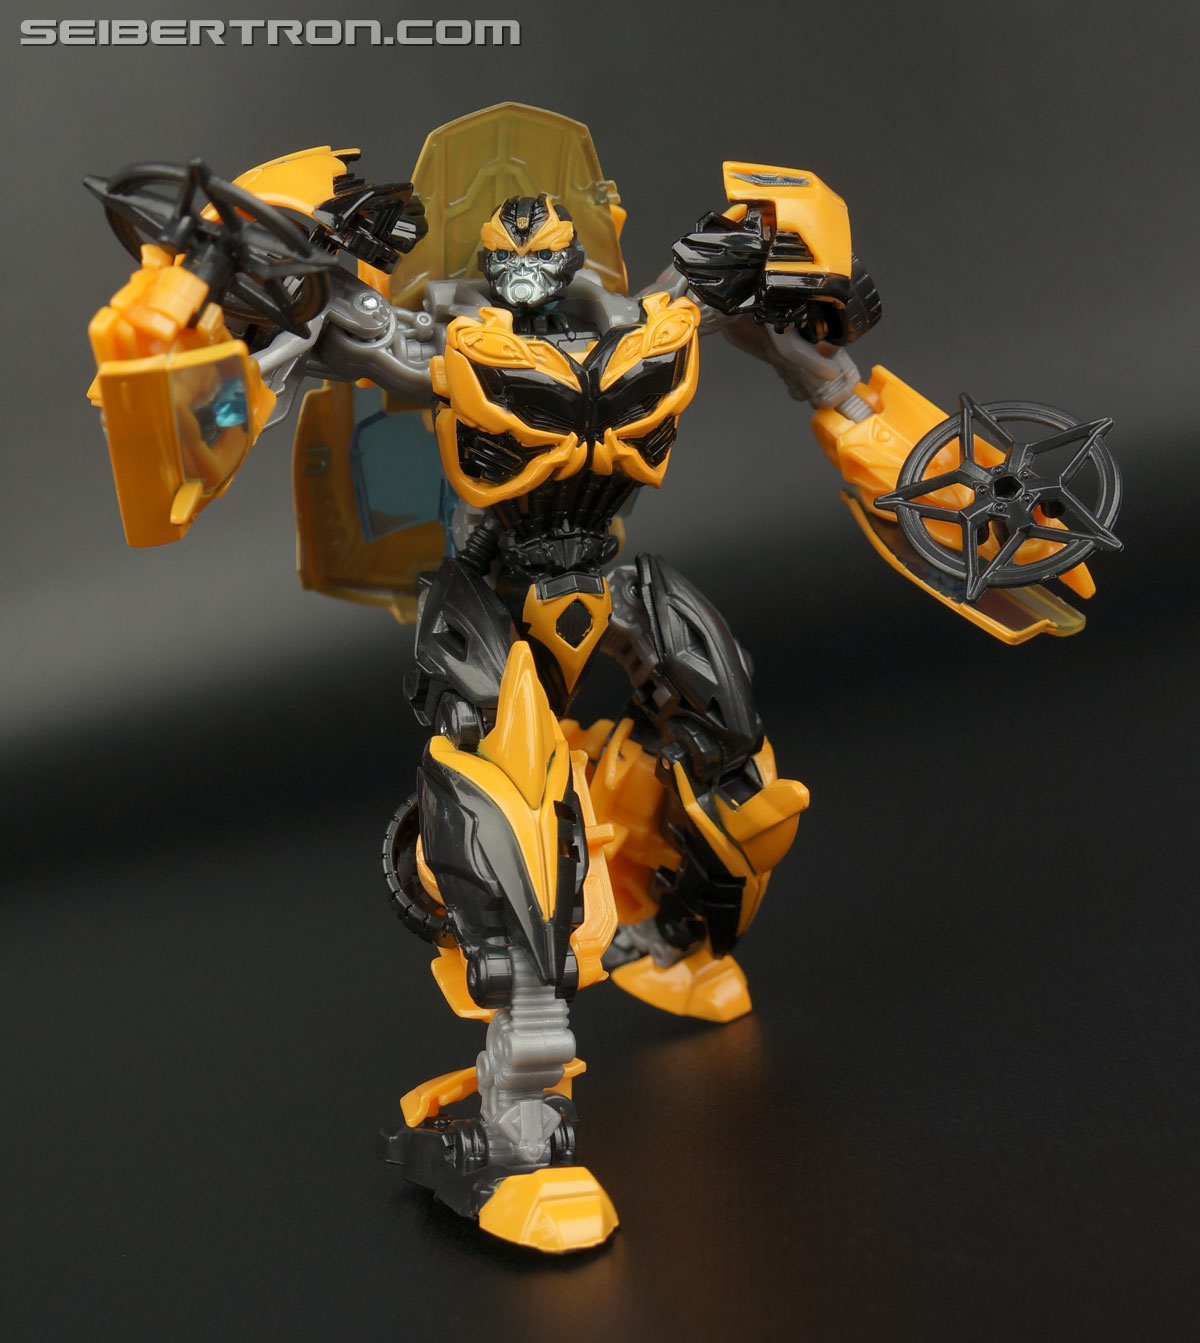 Transformers Age of Extinction: Generations Bumblebee (Image #140 of 190)